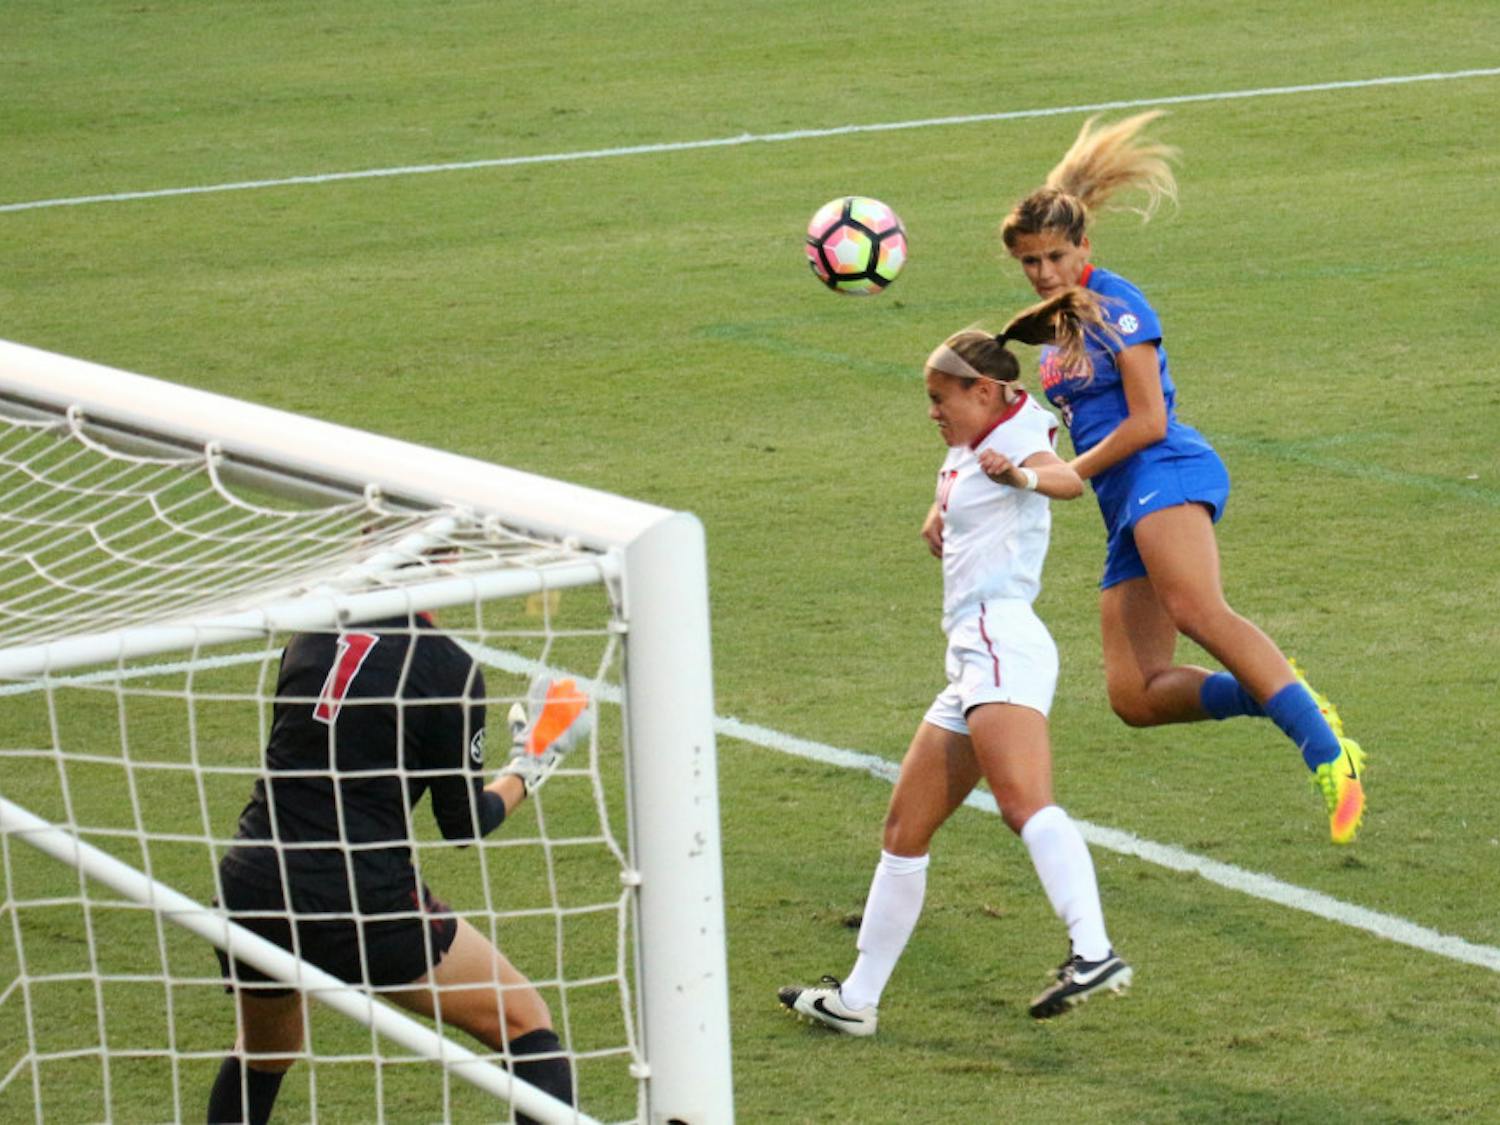 Melanie Monteagudo (far right) heads the ball into the net during Florida's 6-0 win over Alabama on Oct. 20, 2016, at Donald R. Dizney Stadium.